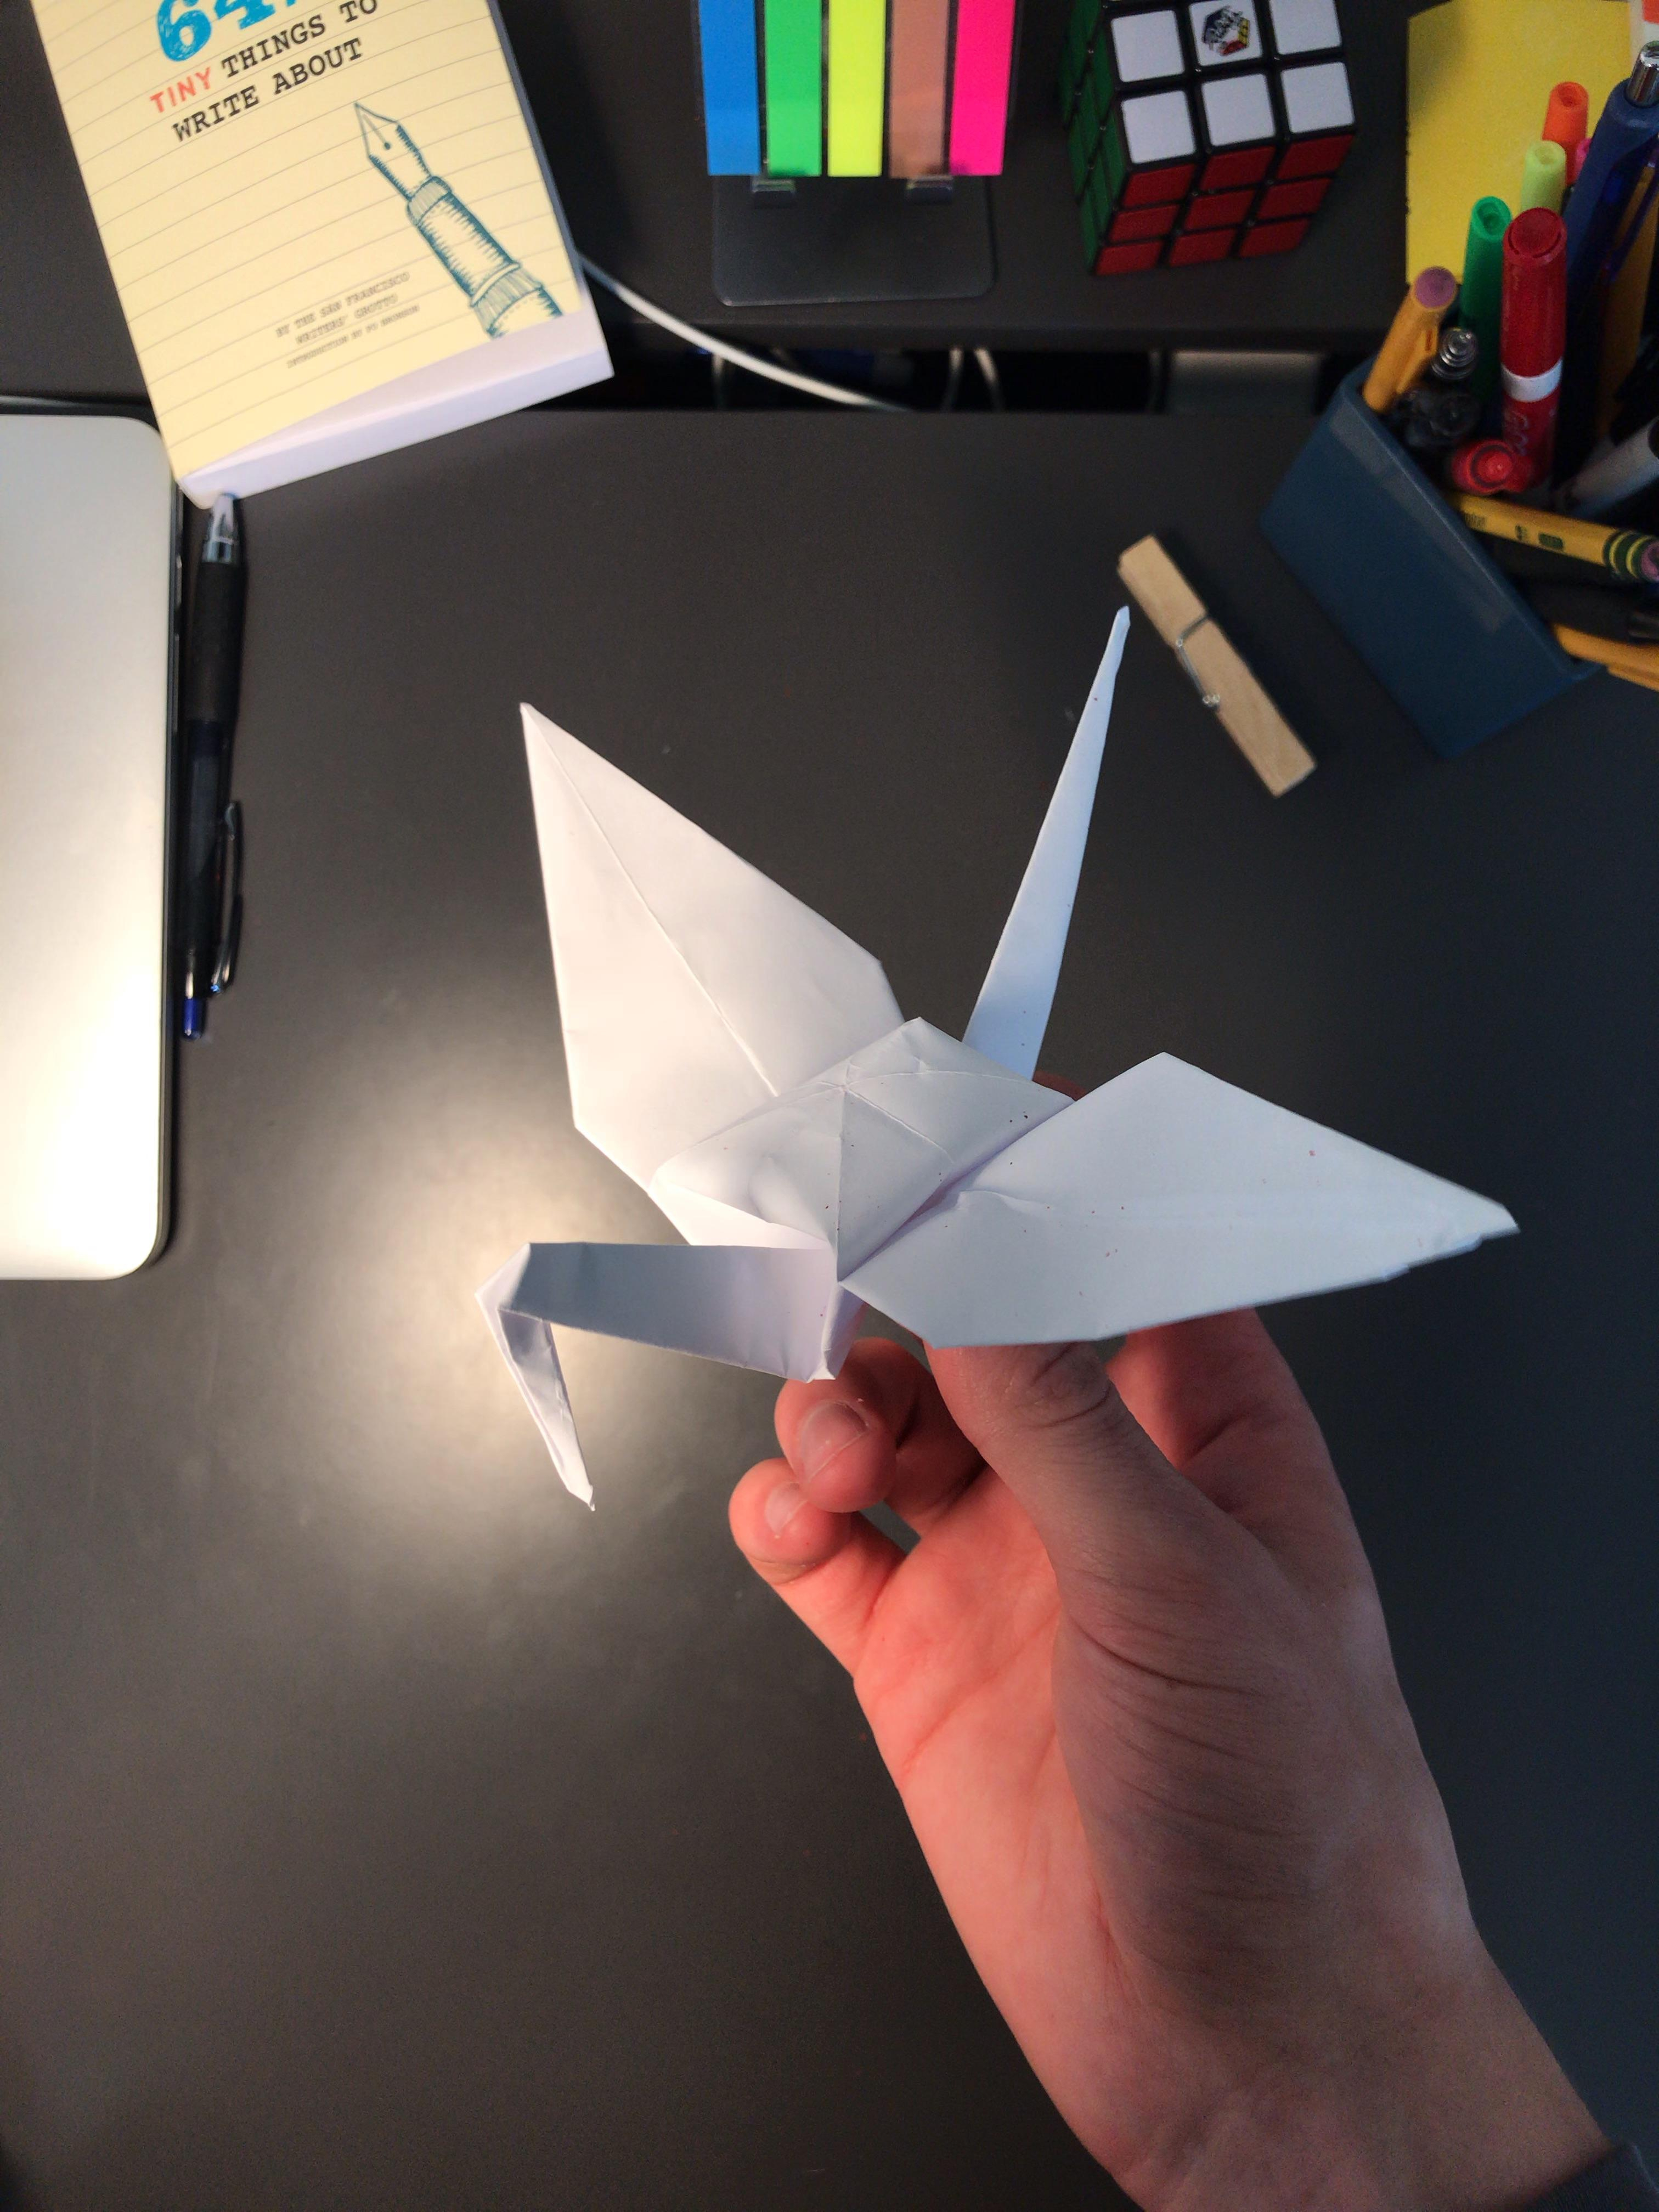 How To Fold An Origami Swan How To Make An Origami Swan Out Of Printer Paper Step 27